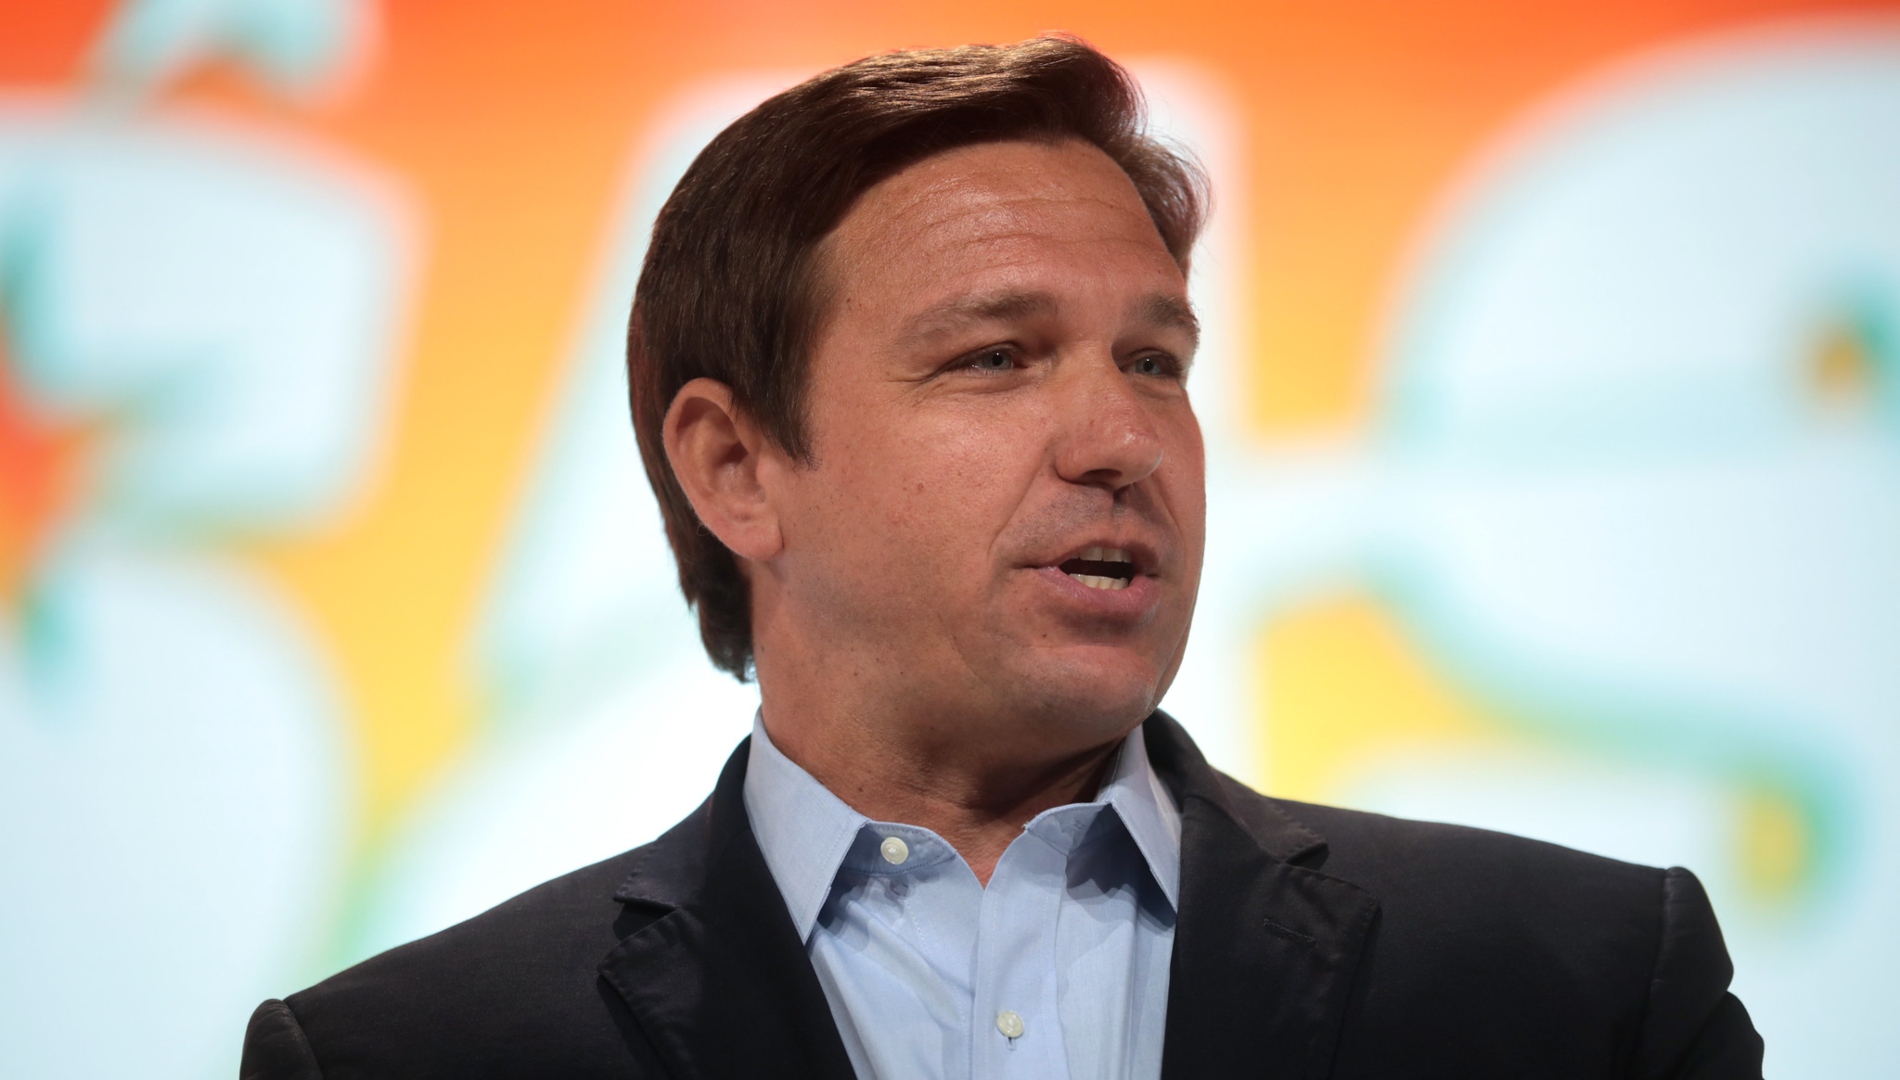 Image: DeSantis promises to hold Pfizer, Moderna accountable for making false claims about covid “vaccines”